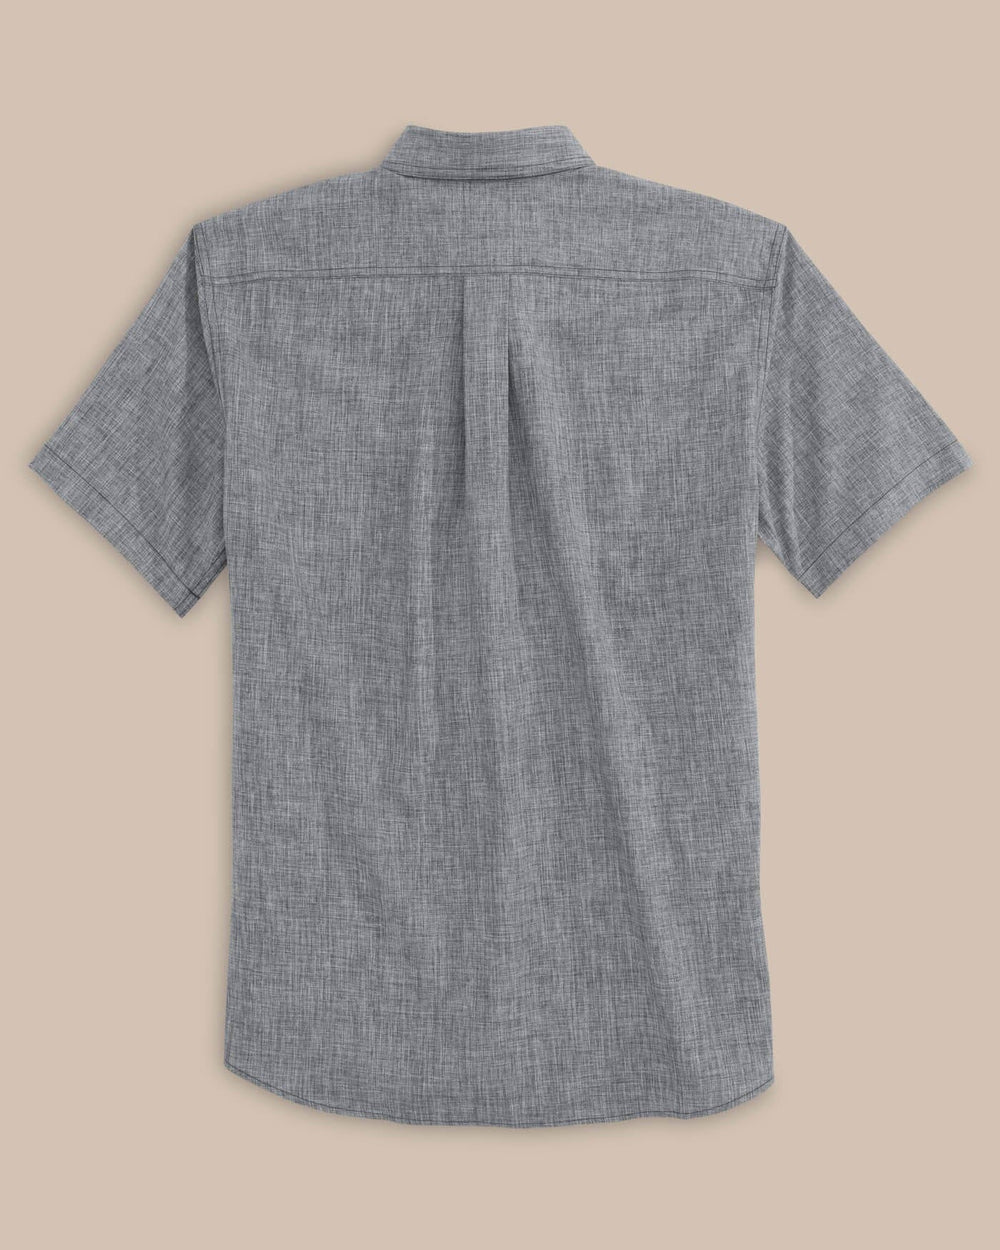 The back view of the Southern Tide Short Sleeve Dock Shirt by Southern Tide - Polarized Grey